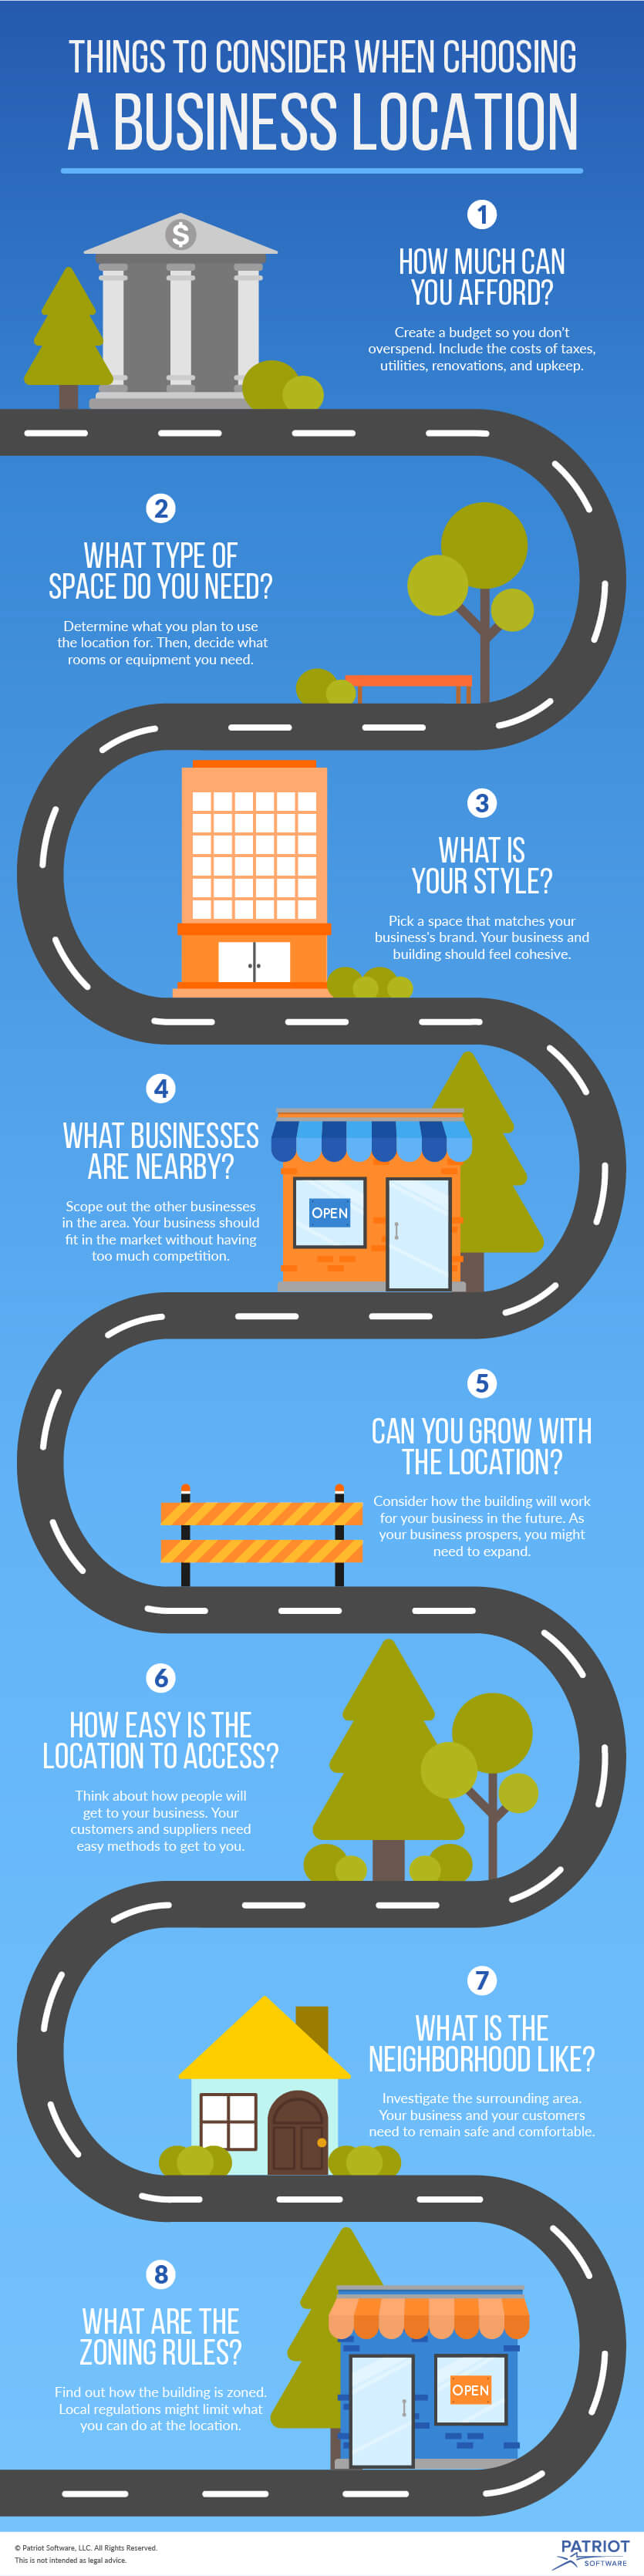 What to consider for business location?